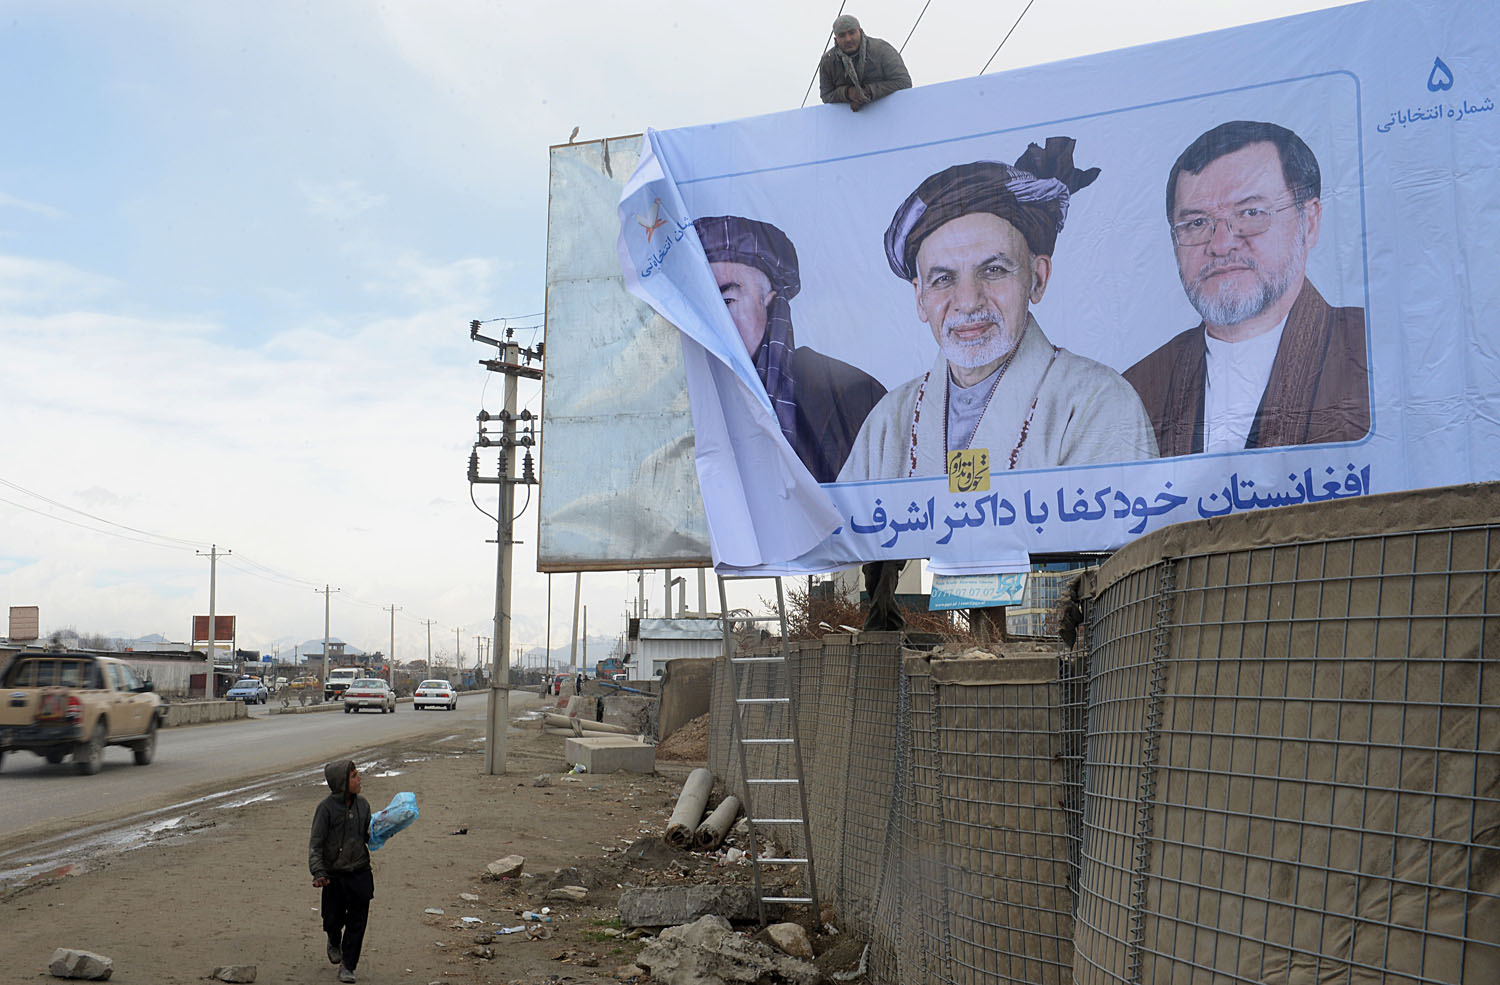 Afghan workers install an election campaign poster of Afghan presidential candidate Ashraf Ghani Ahmadzai in Kabul on Feb. 3, 2014.